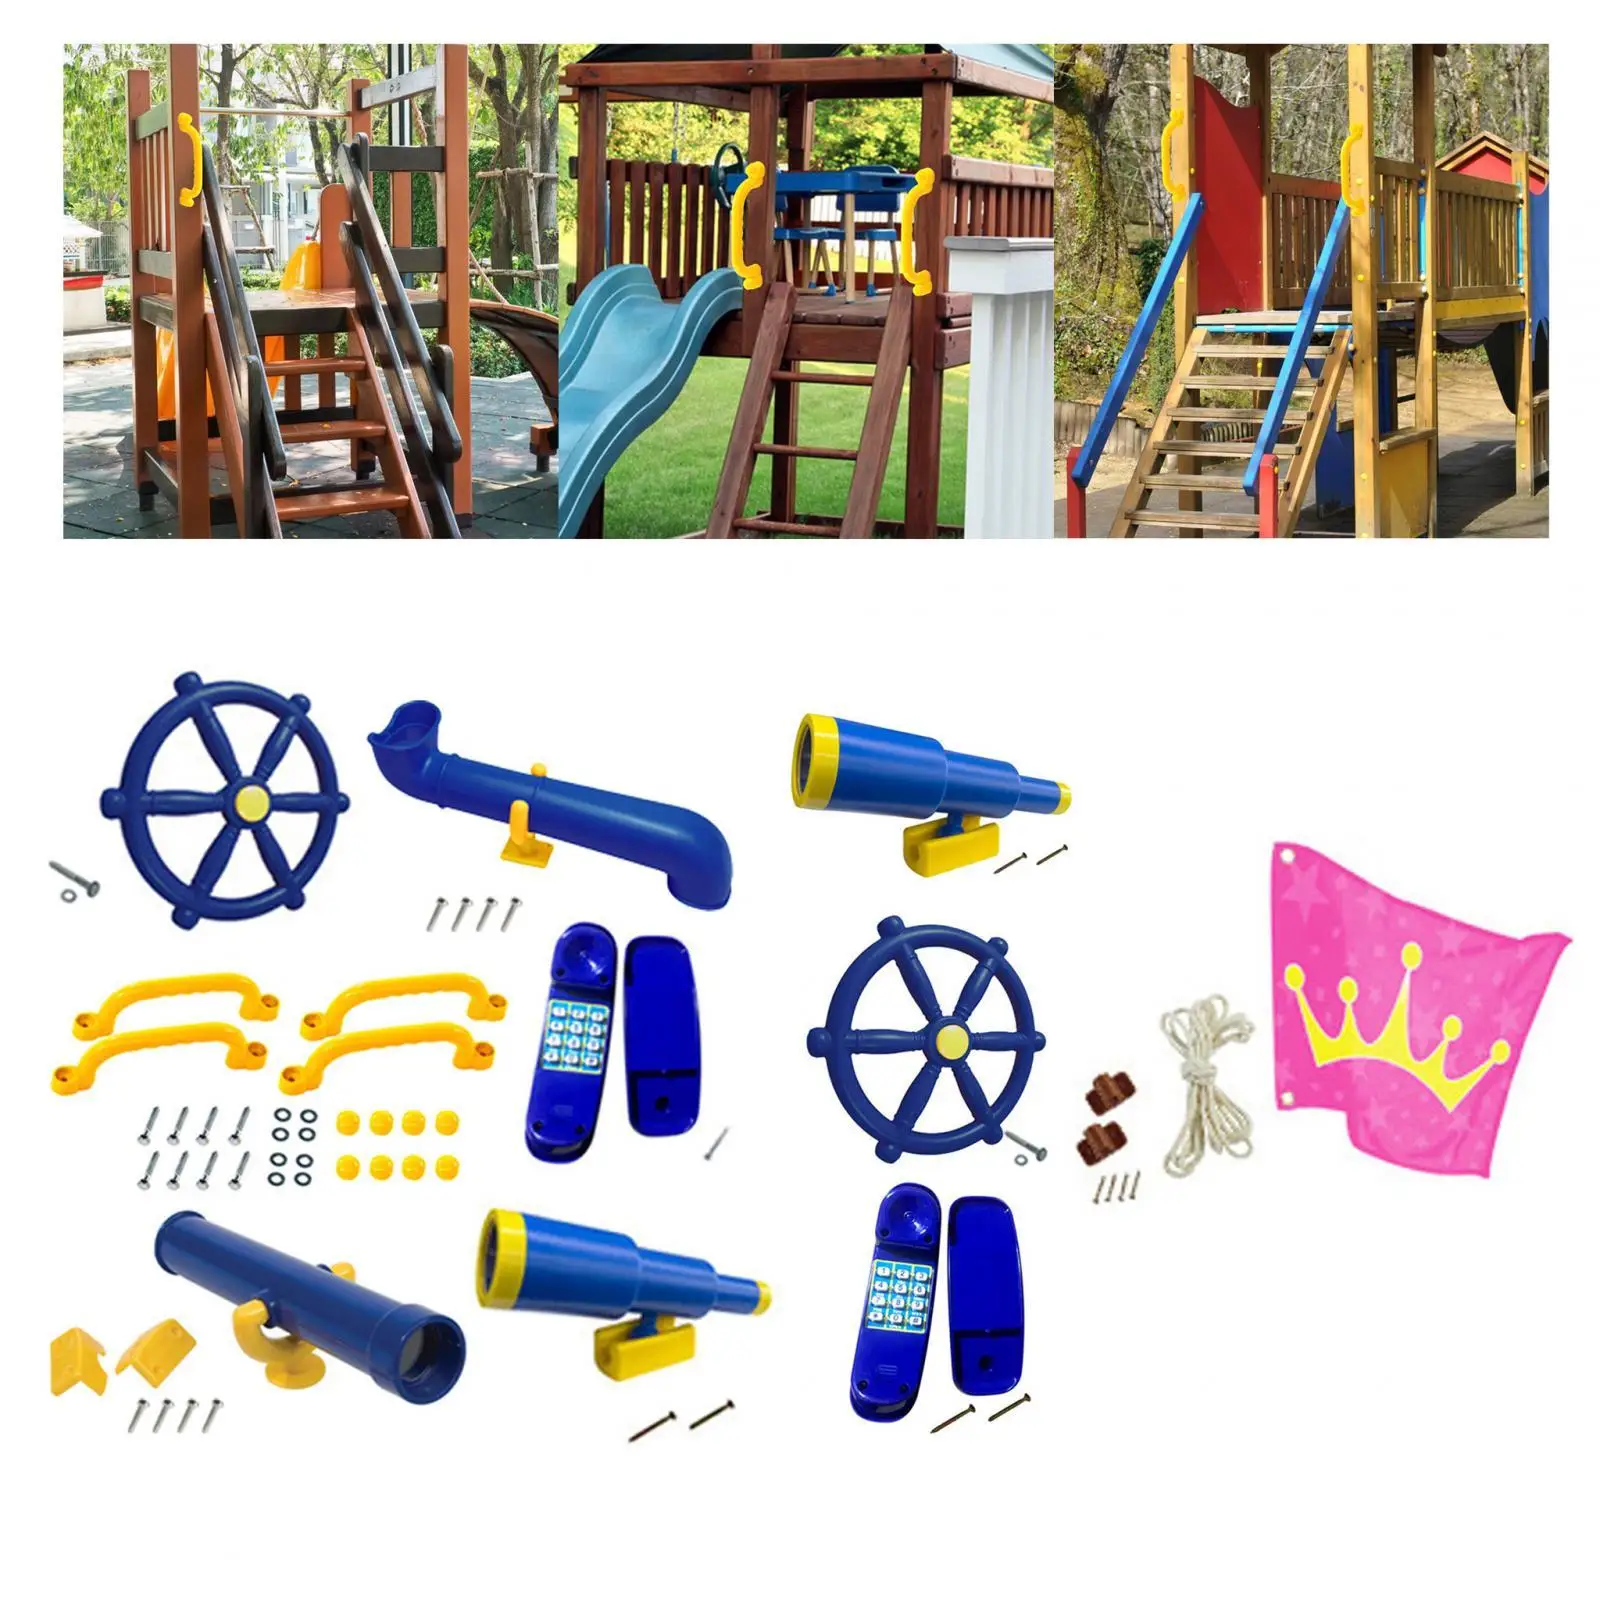 Playground Accessories Pirate Ship Parts for Backyard Jungle Gym Treehouse